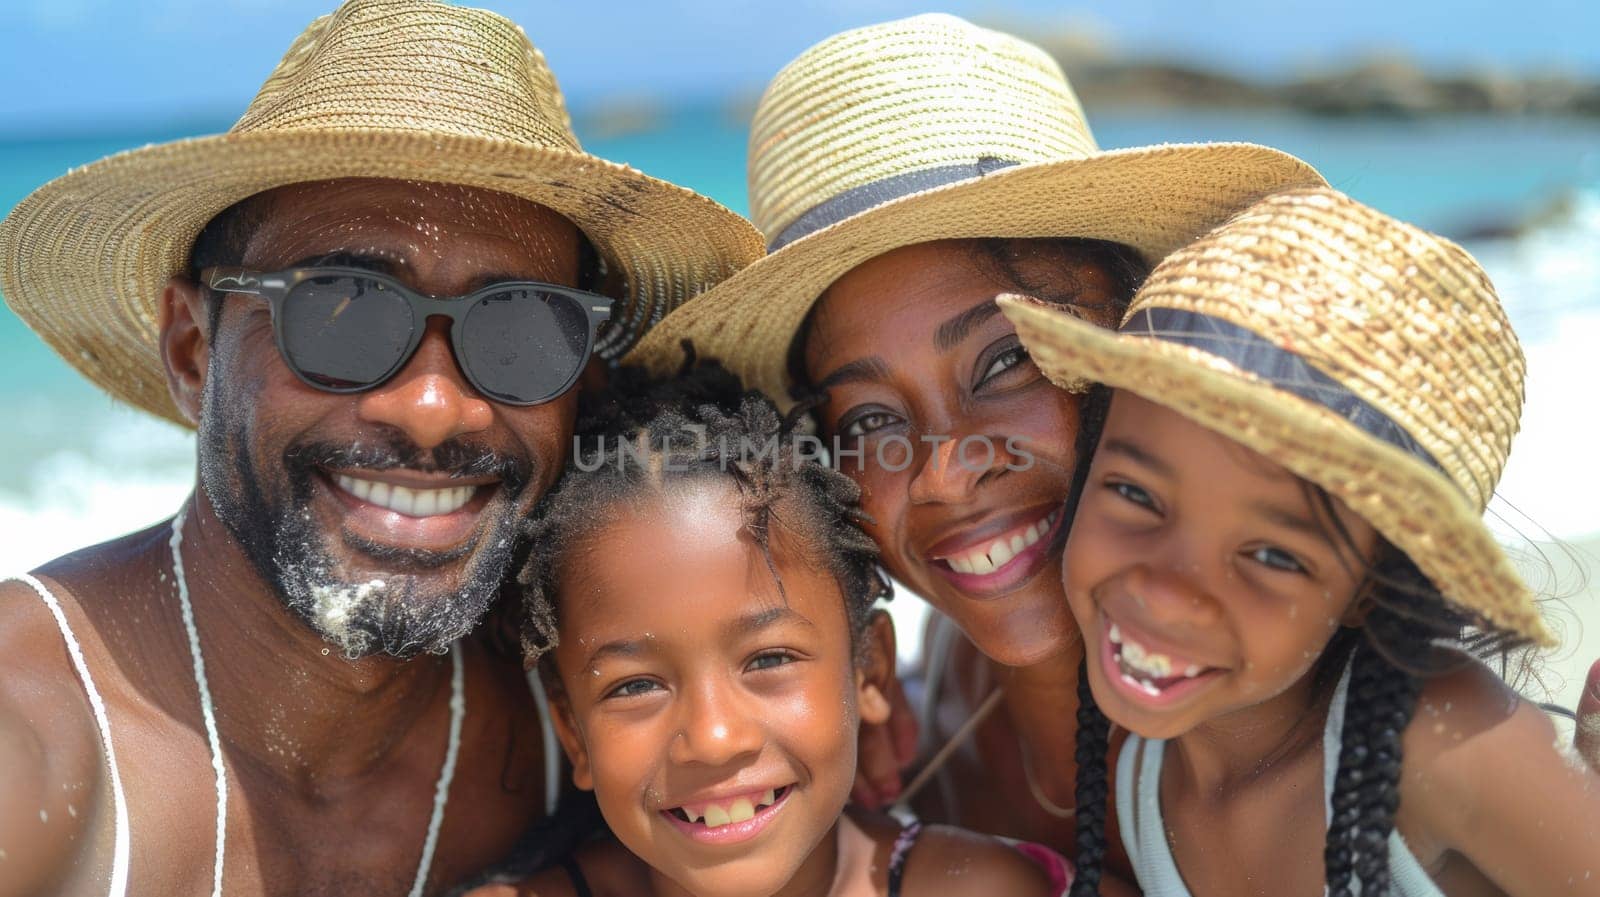 A family of three people wearing hats and sunglasses on the beach